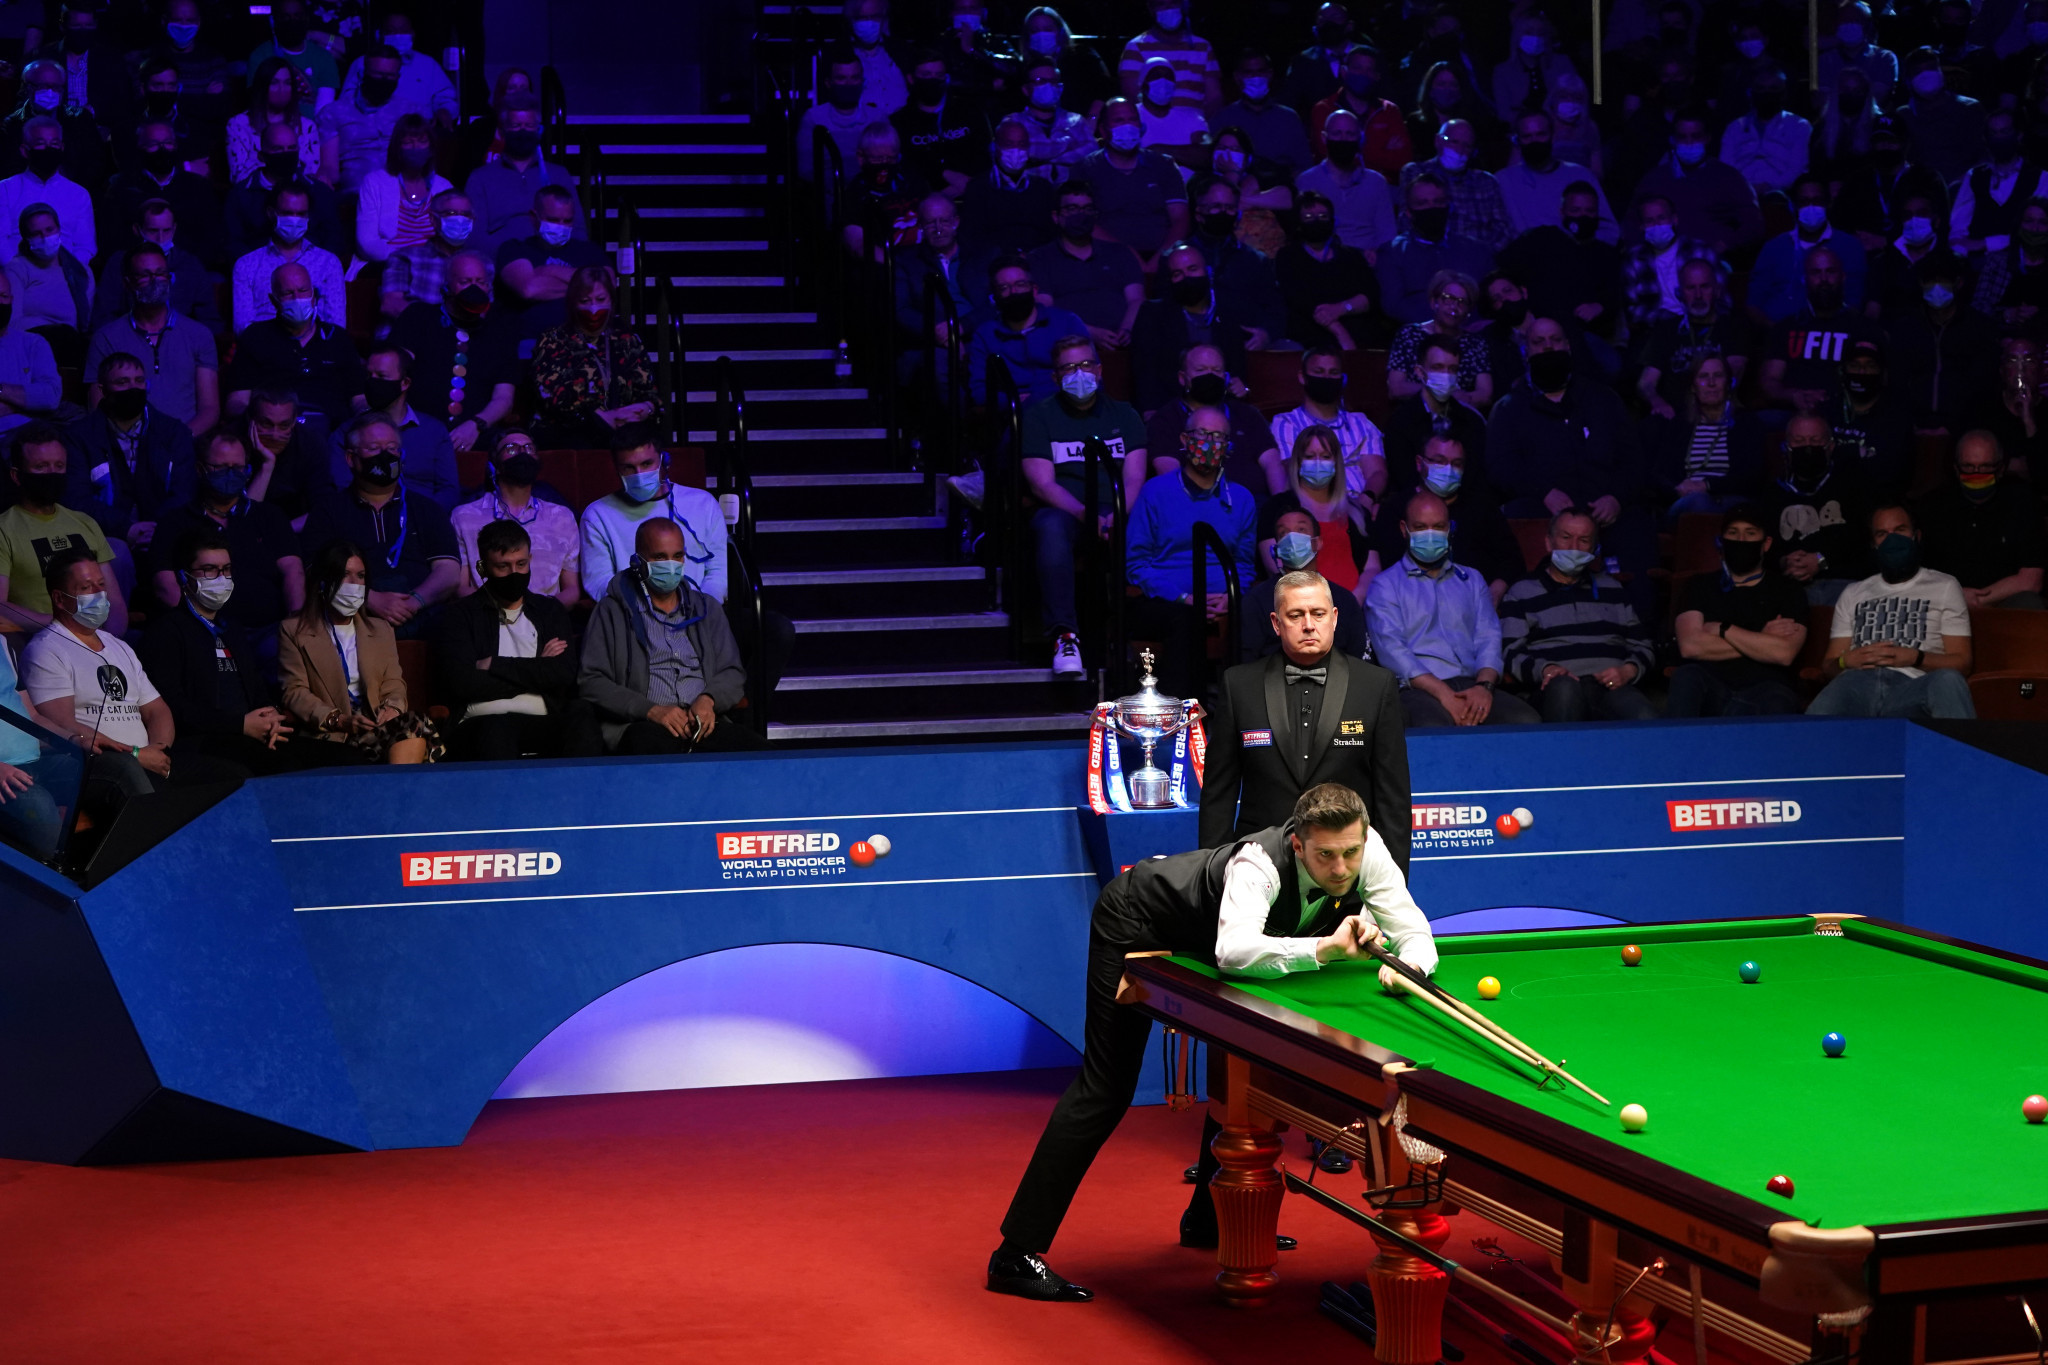 Mark Selby opened up a three frame lead against compatriot Shaun Murphy after day one of the World Snooker Championship final ©Getty Images